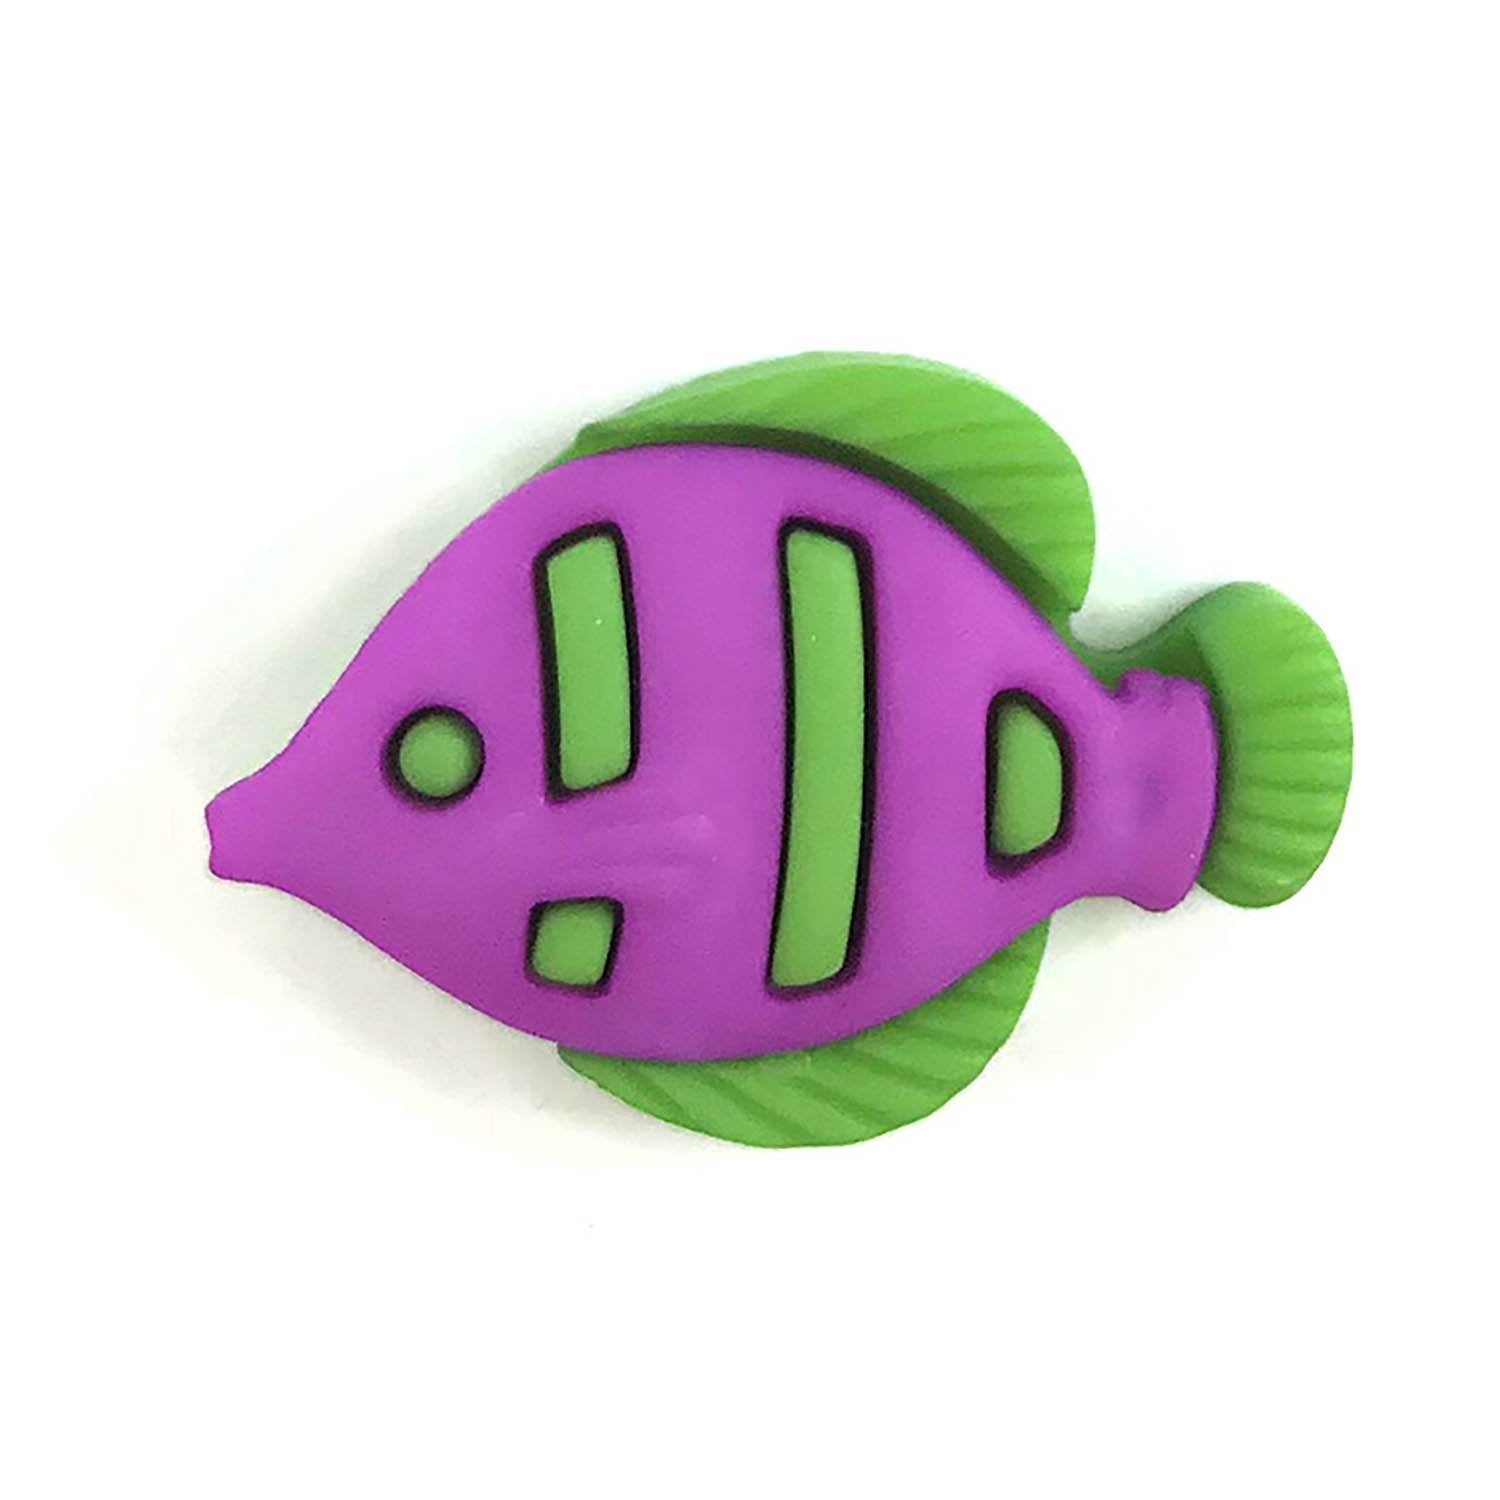 Tropical Fish - B362 - Buttons Galore and More